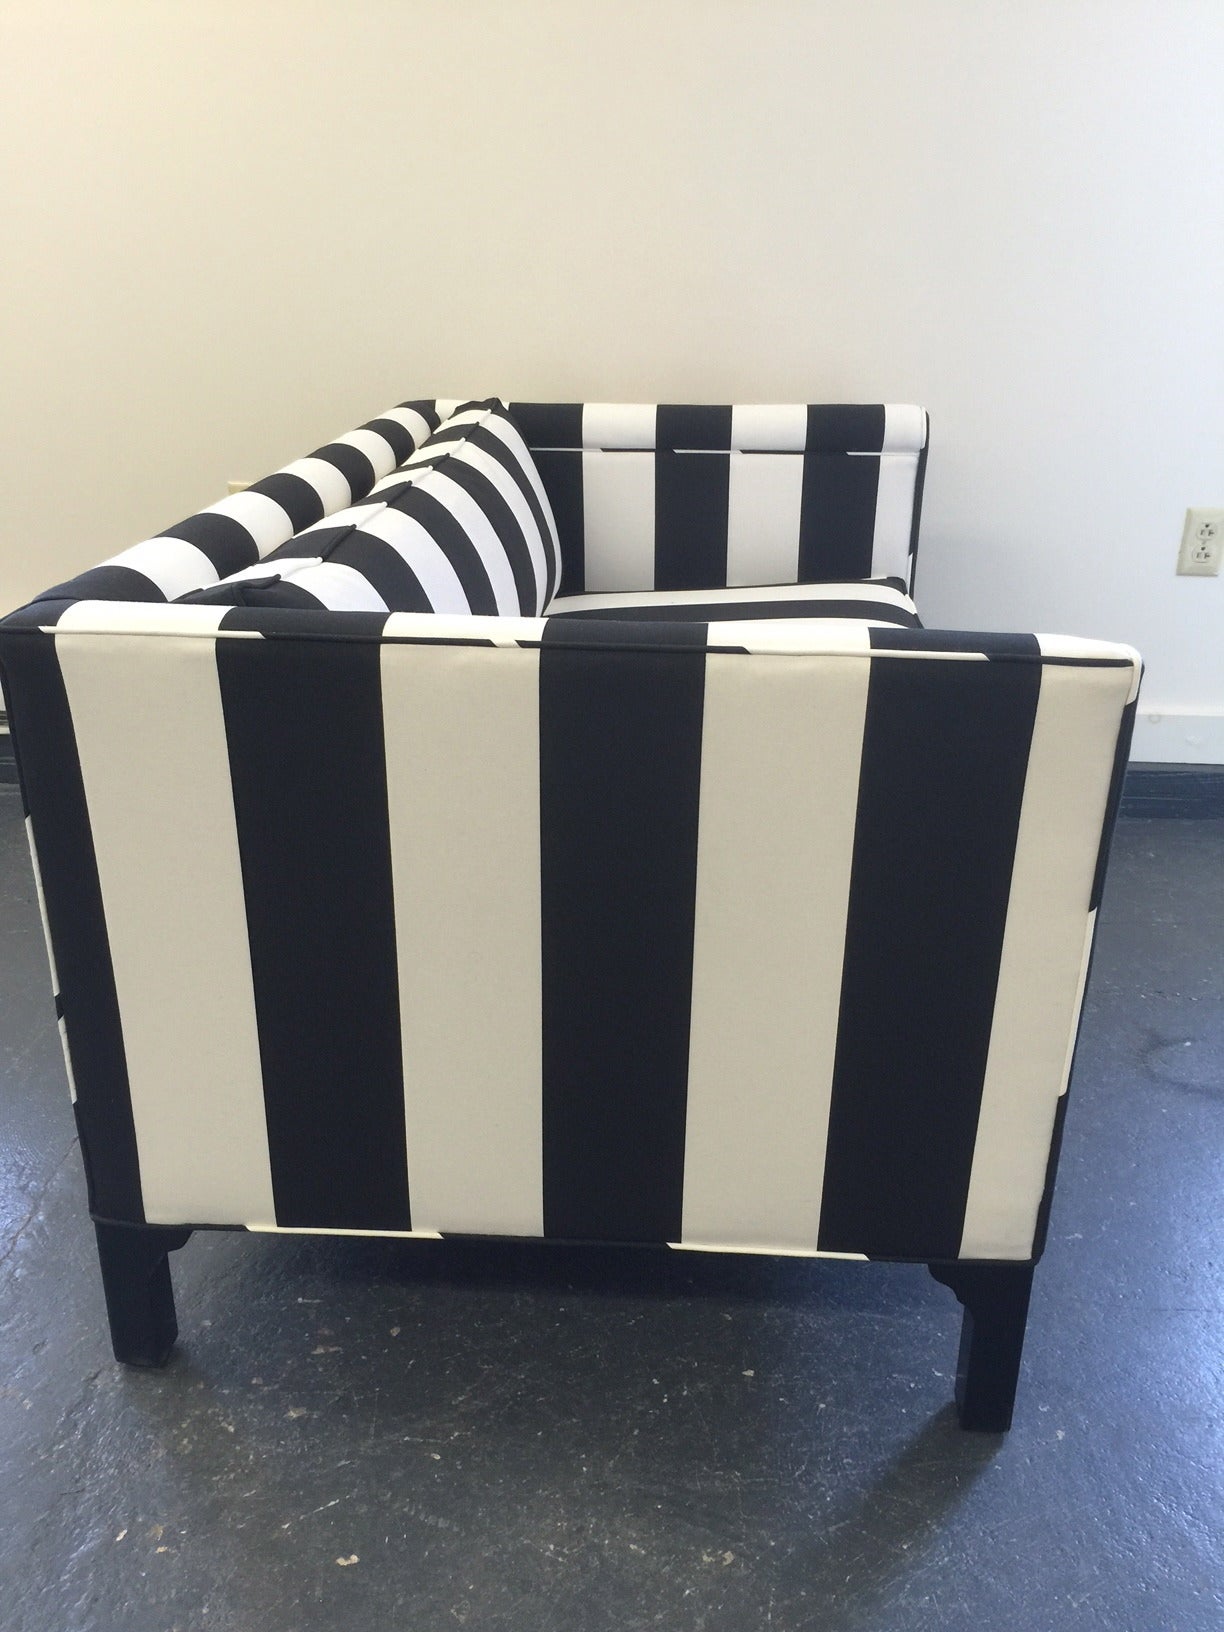 Glamorous black and white loveseat, just newly recovered with Serena and Lily  striped fabric. Feet are ebonized high gloss wood. Single foam seat cushions, very comfy and sophisticated.